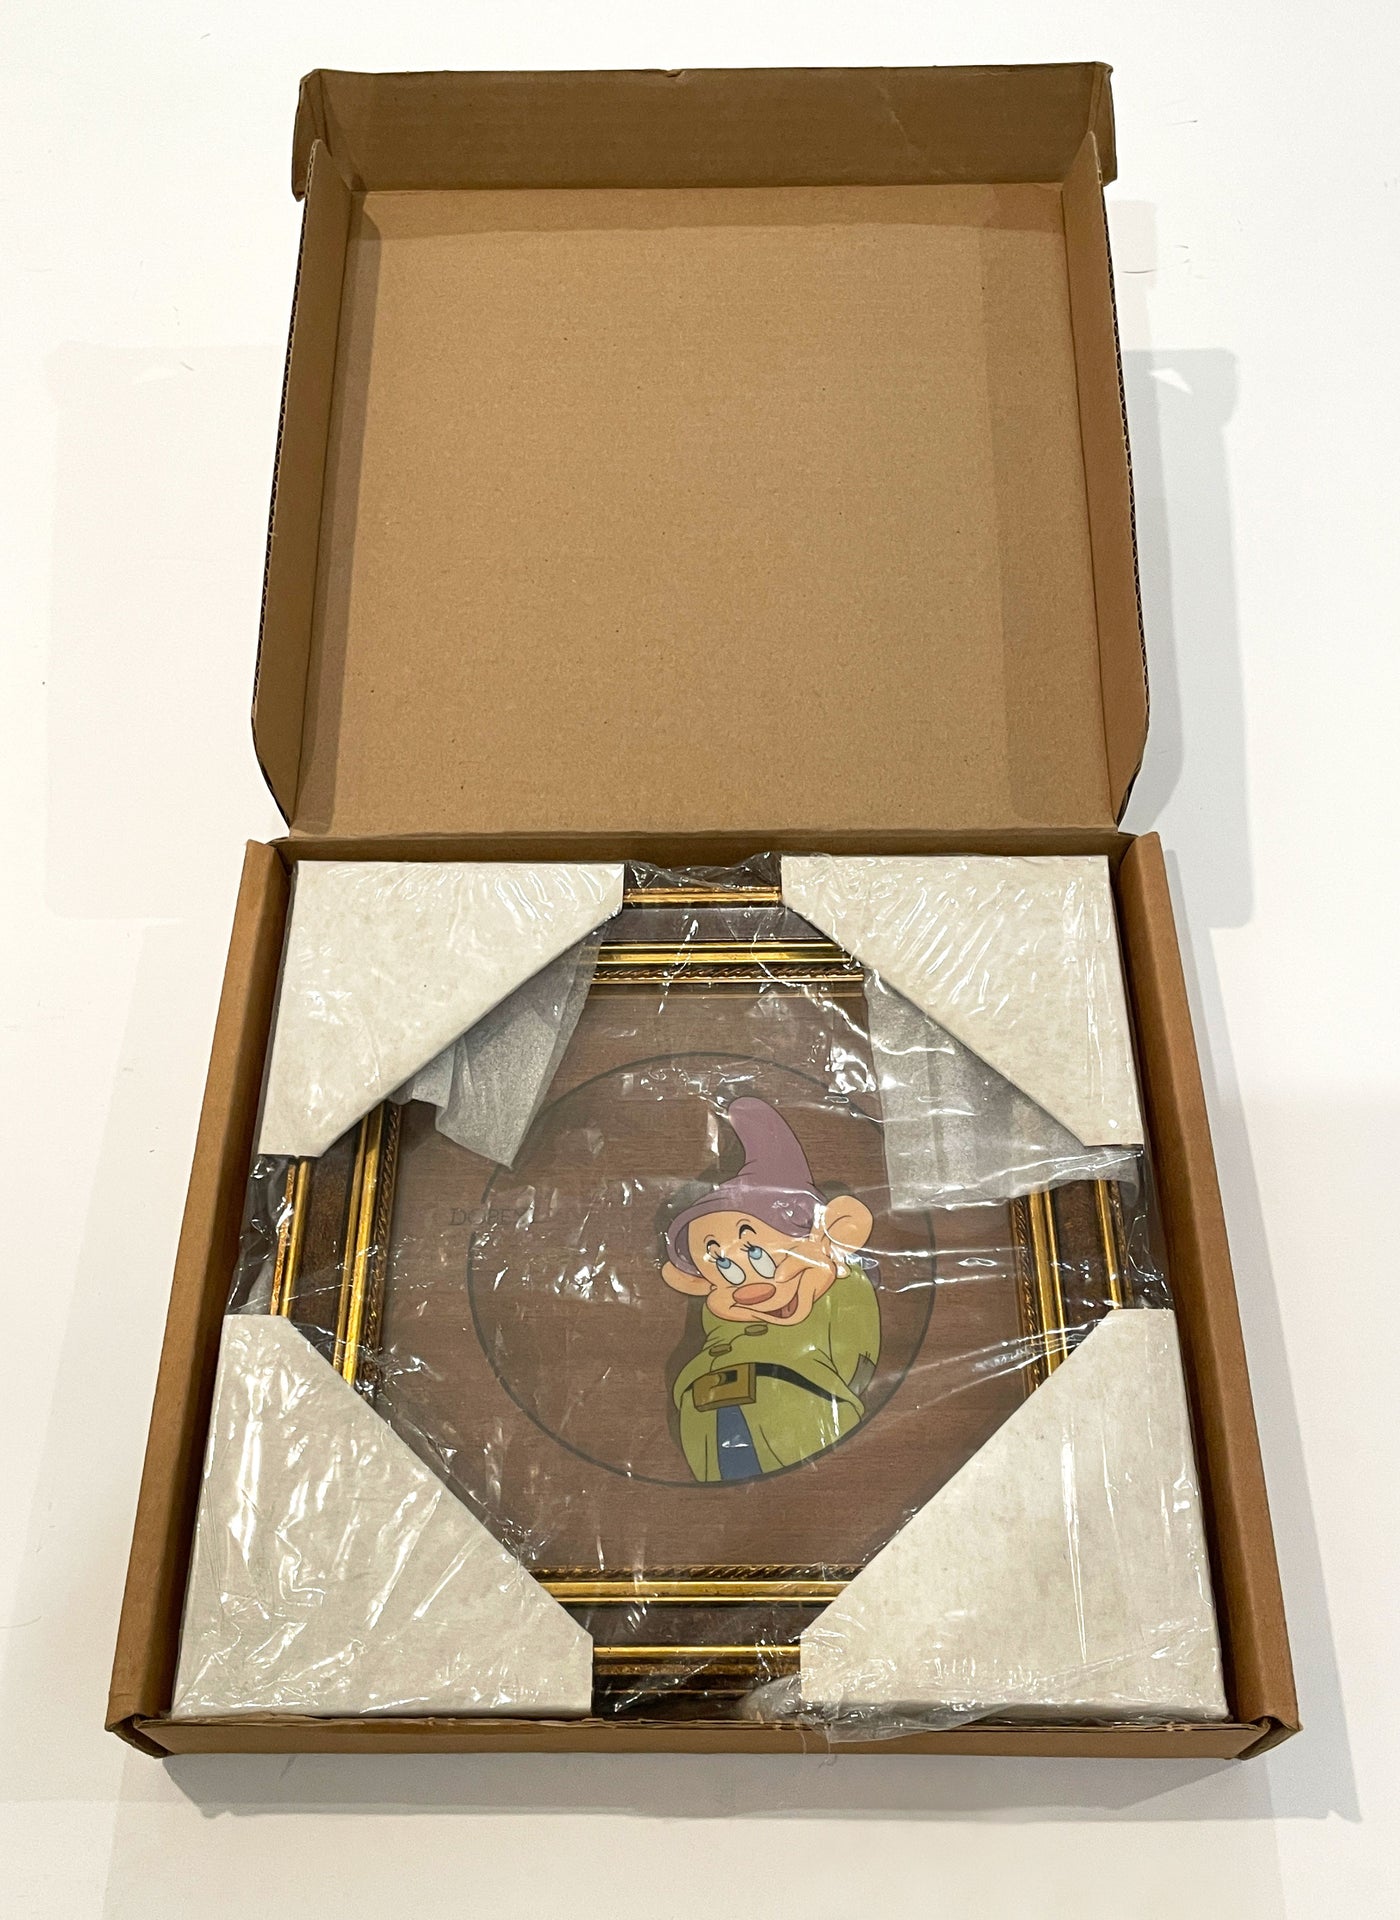 Original Walt Disney Limited Edition Courvoisier Cel from Snow White and the Seven Dwarfs, featuring Dopey